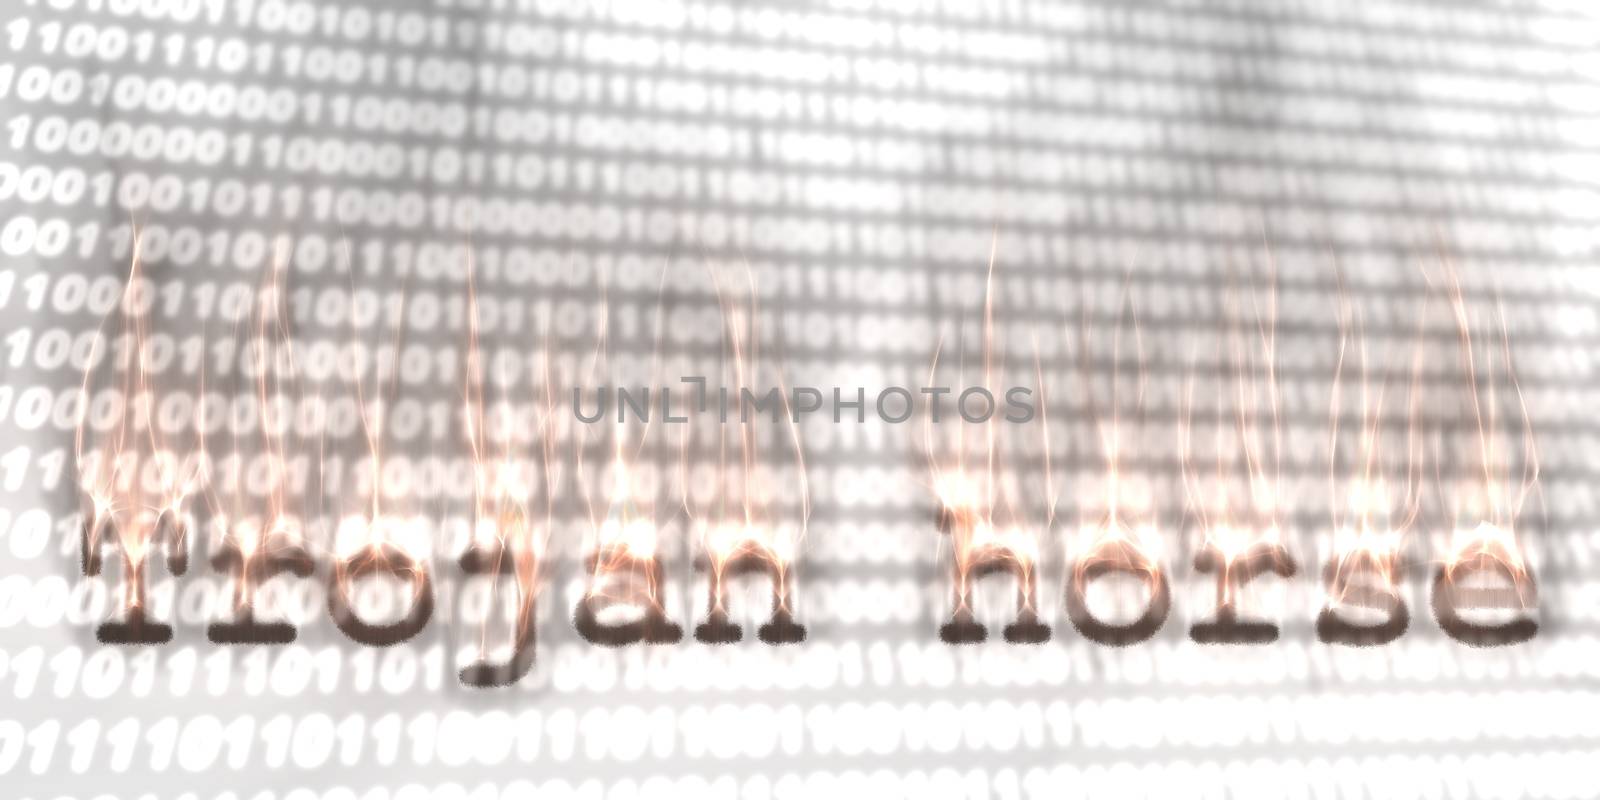 Banner of internet security buzzword text done with kirlian photography